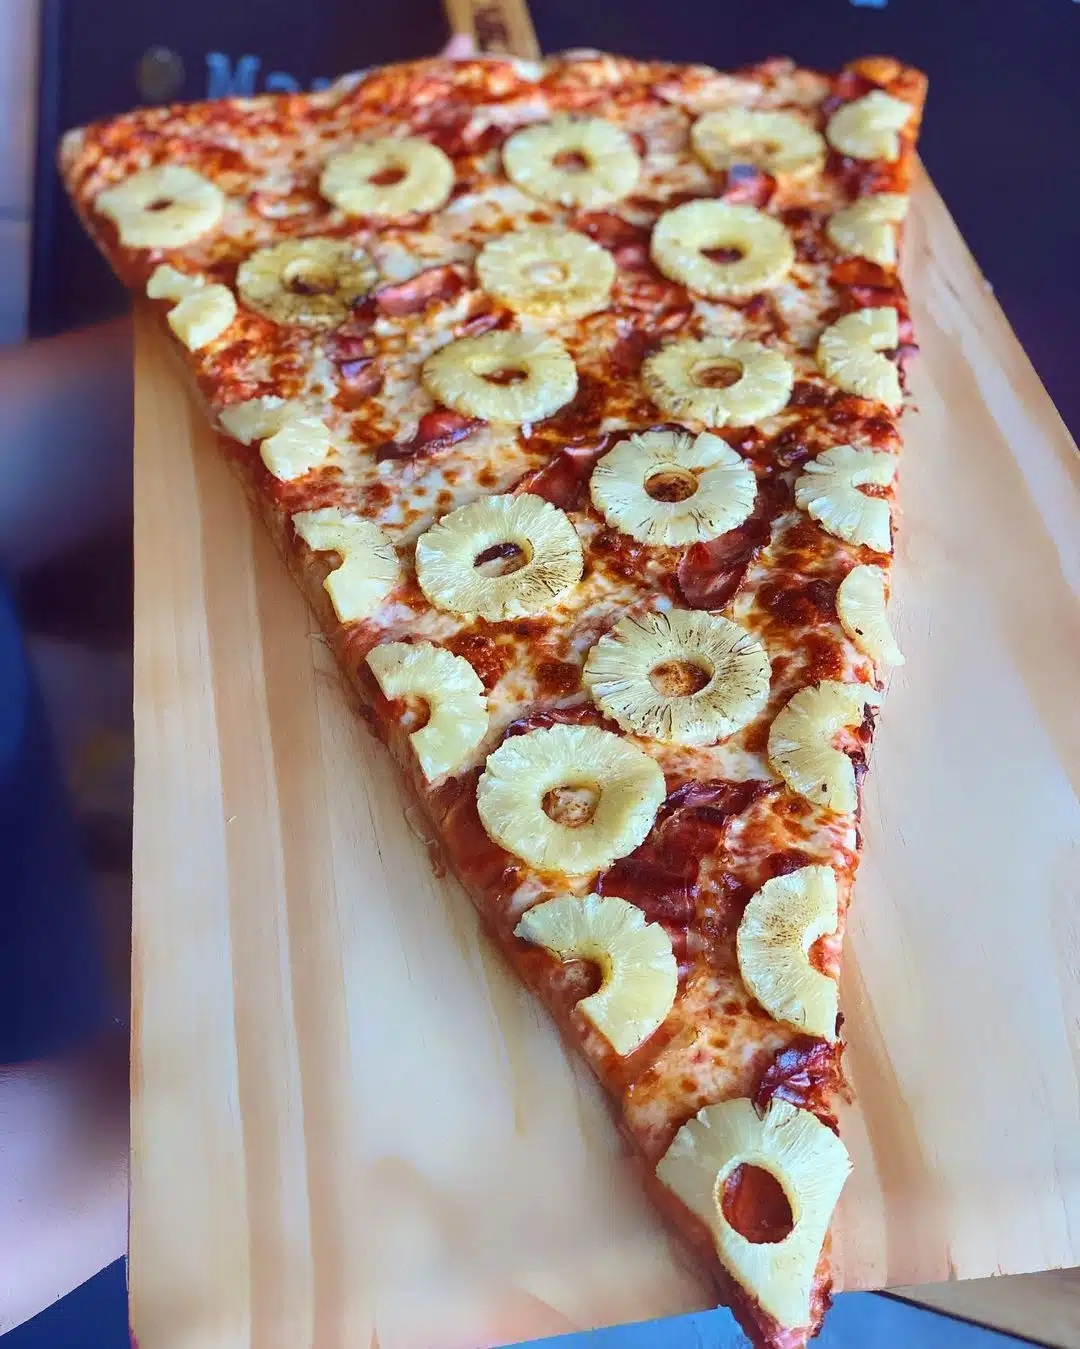 Does Pineapple Belong On Pizza?